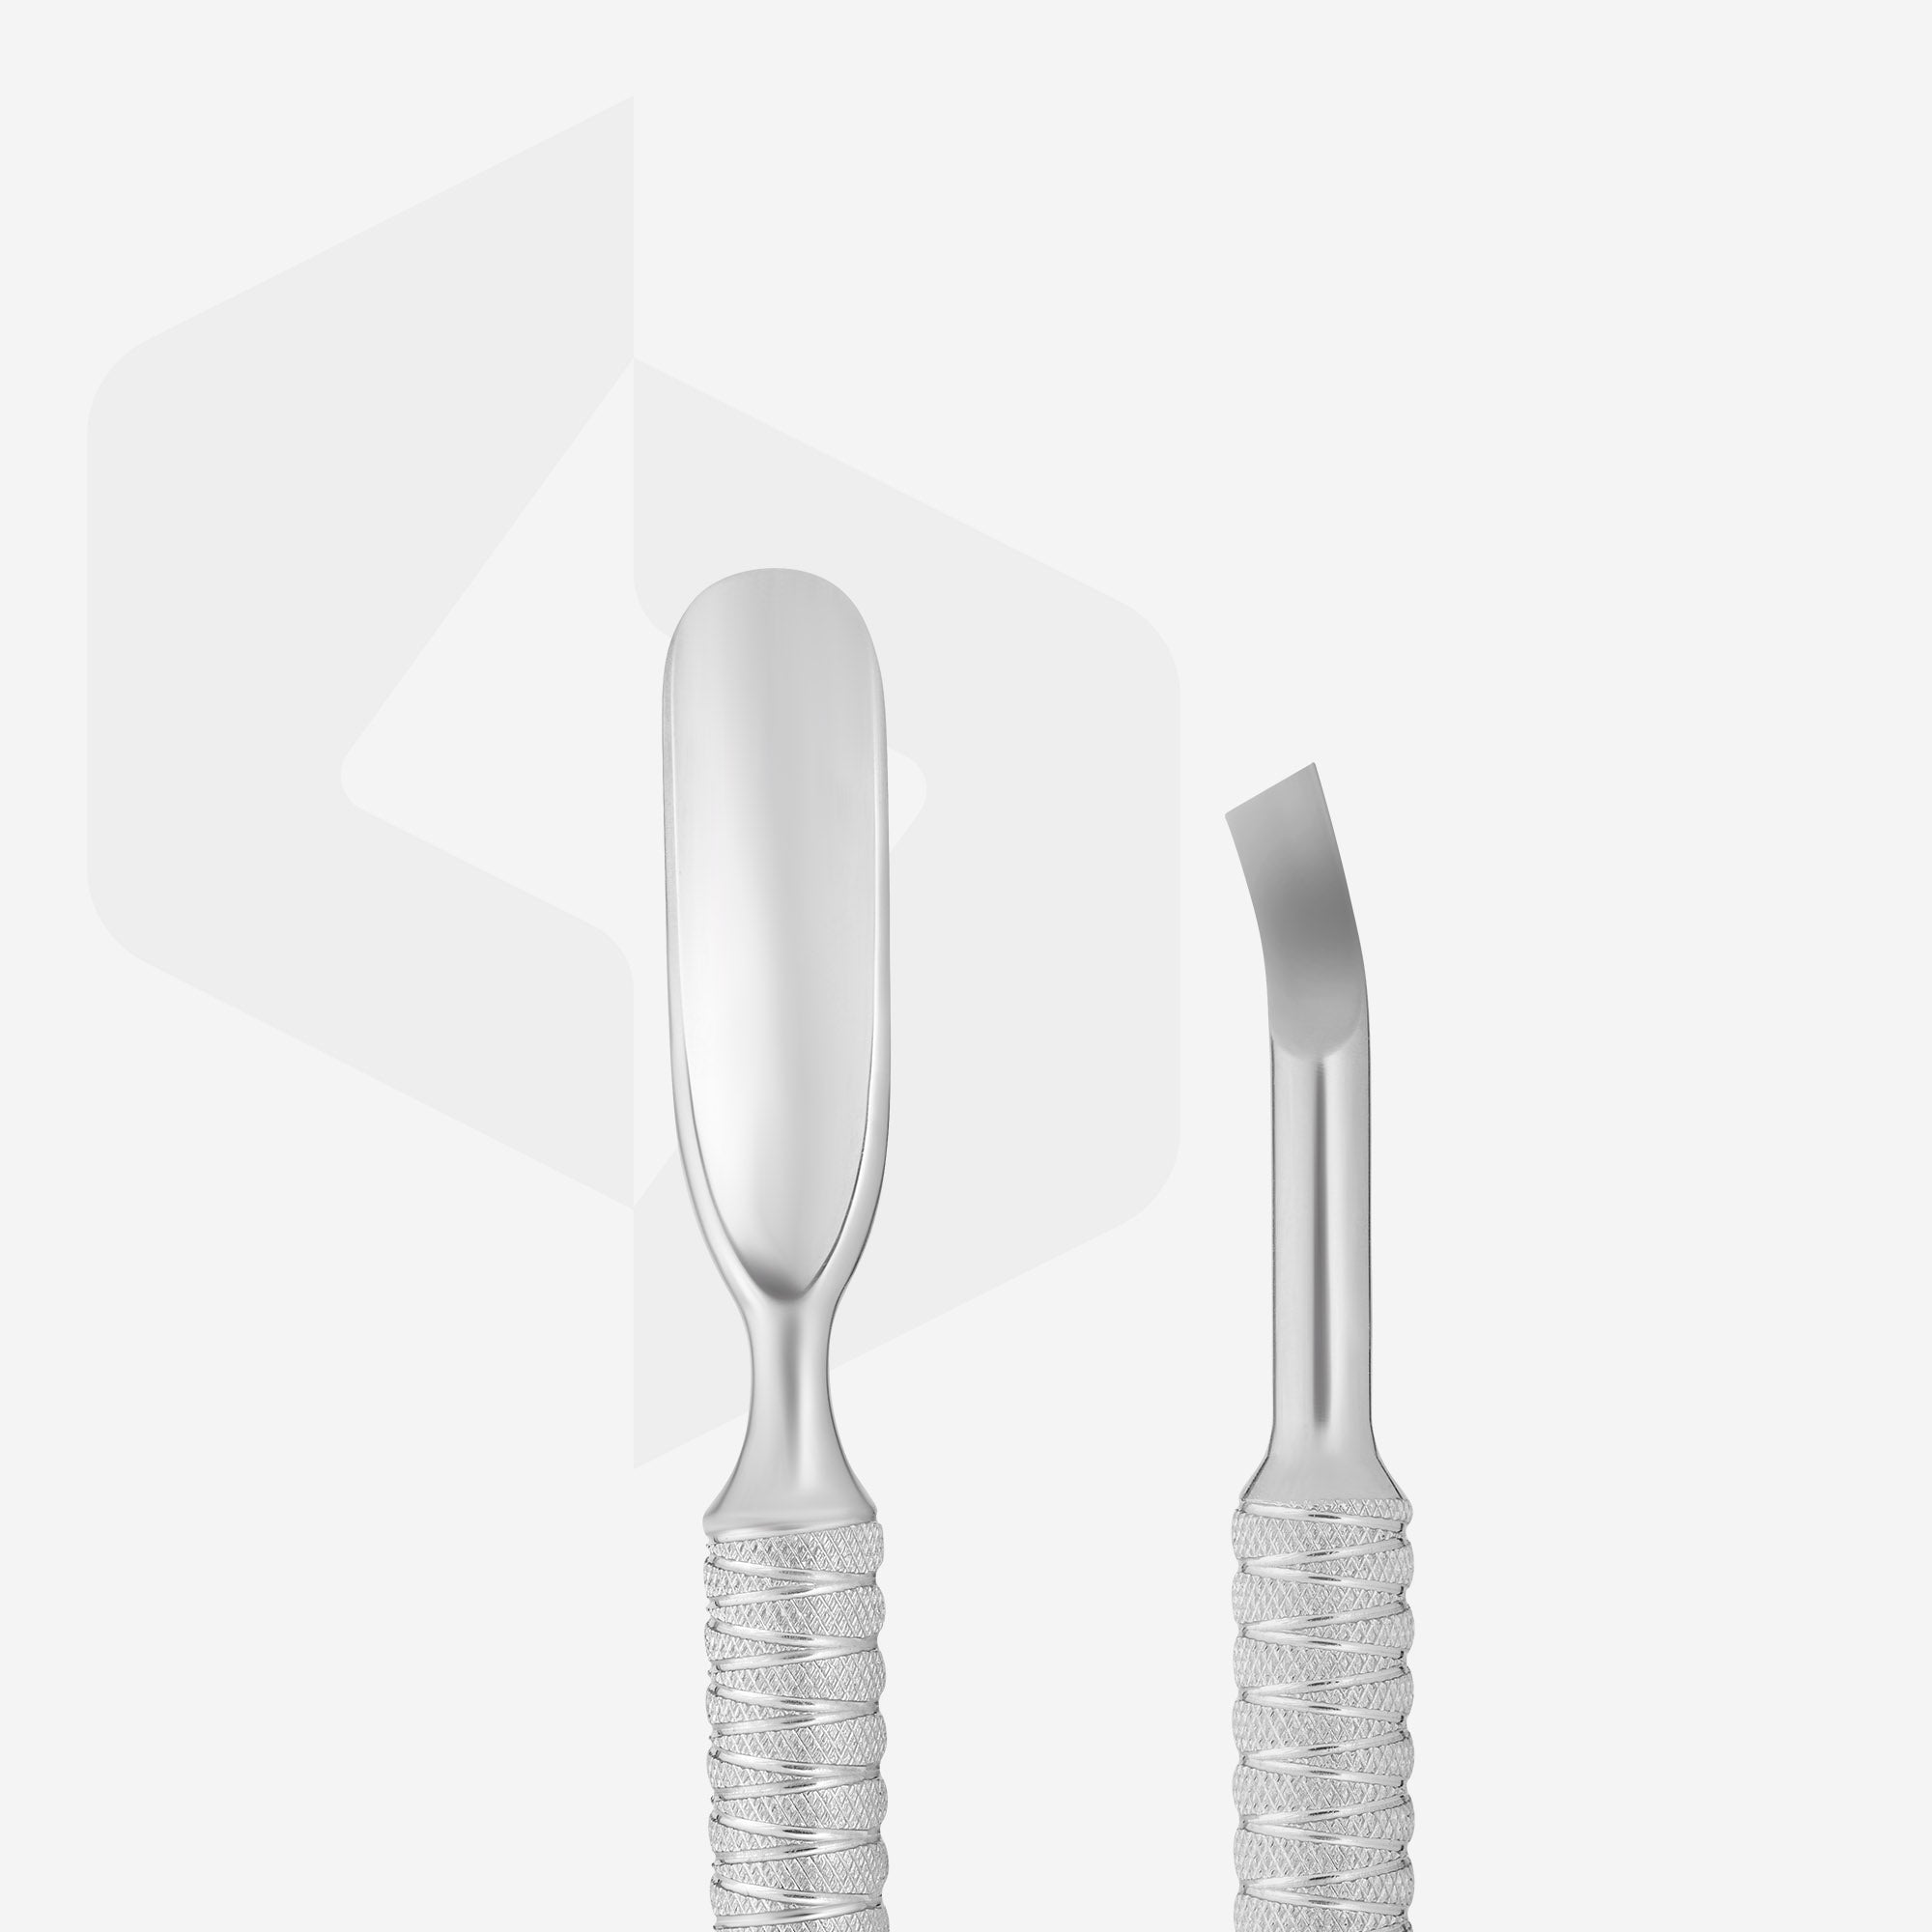 Staleks Pro Expert 30 Type 4.2 Cuticle Pusher (Rounded Wide Pusher & Bent Blade) PE-30/4.2